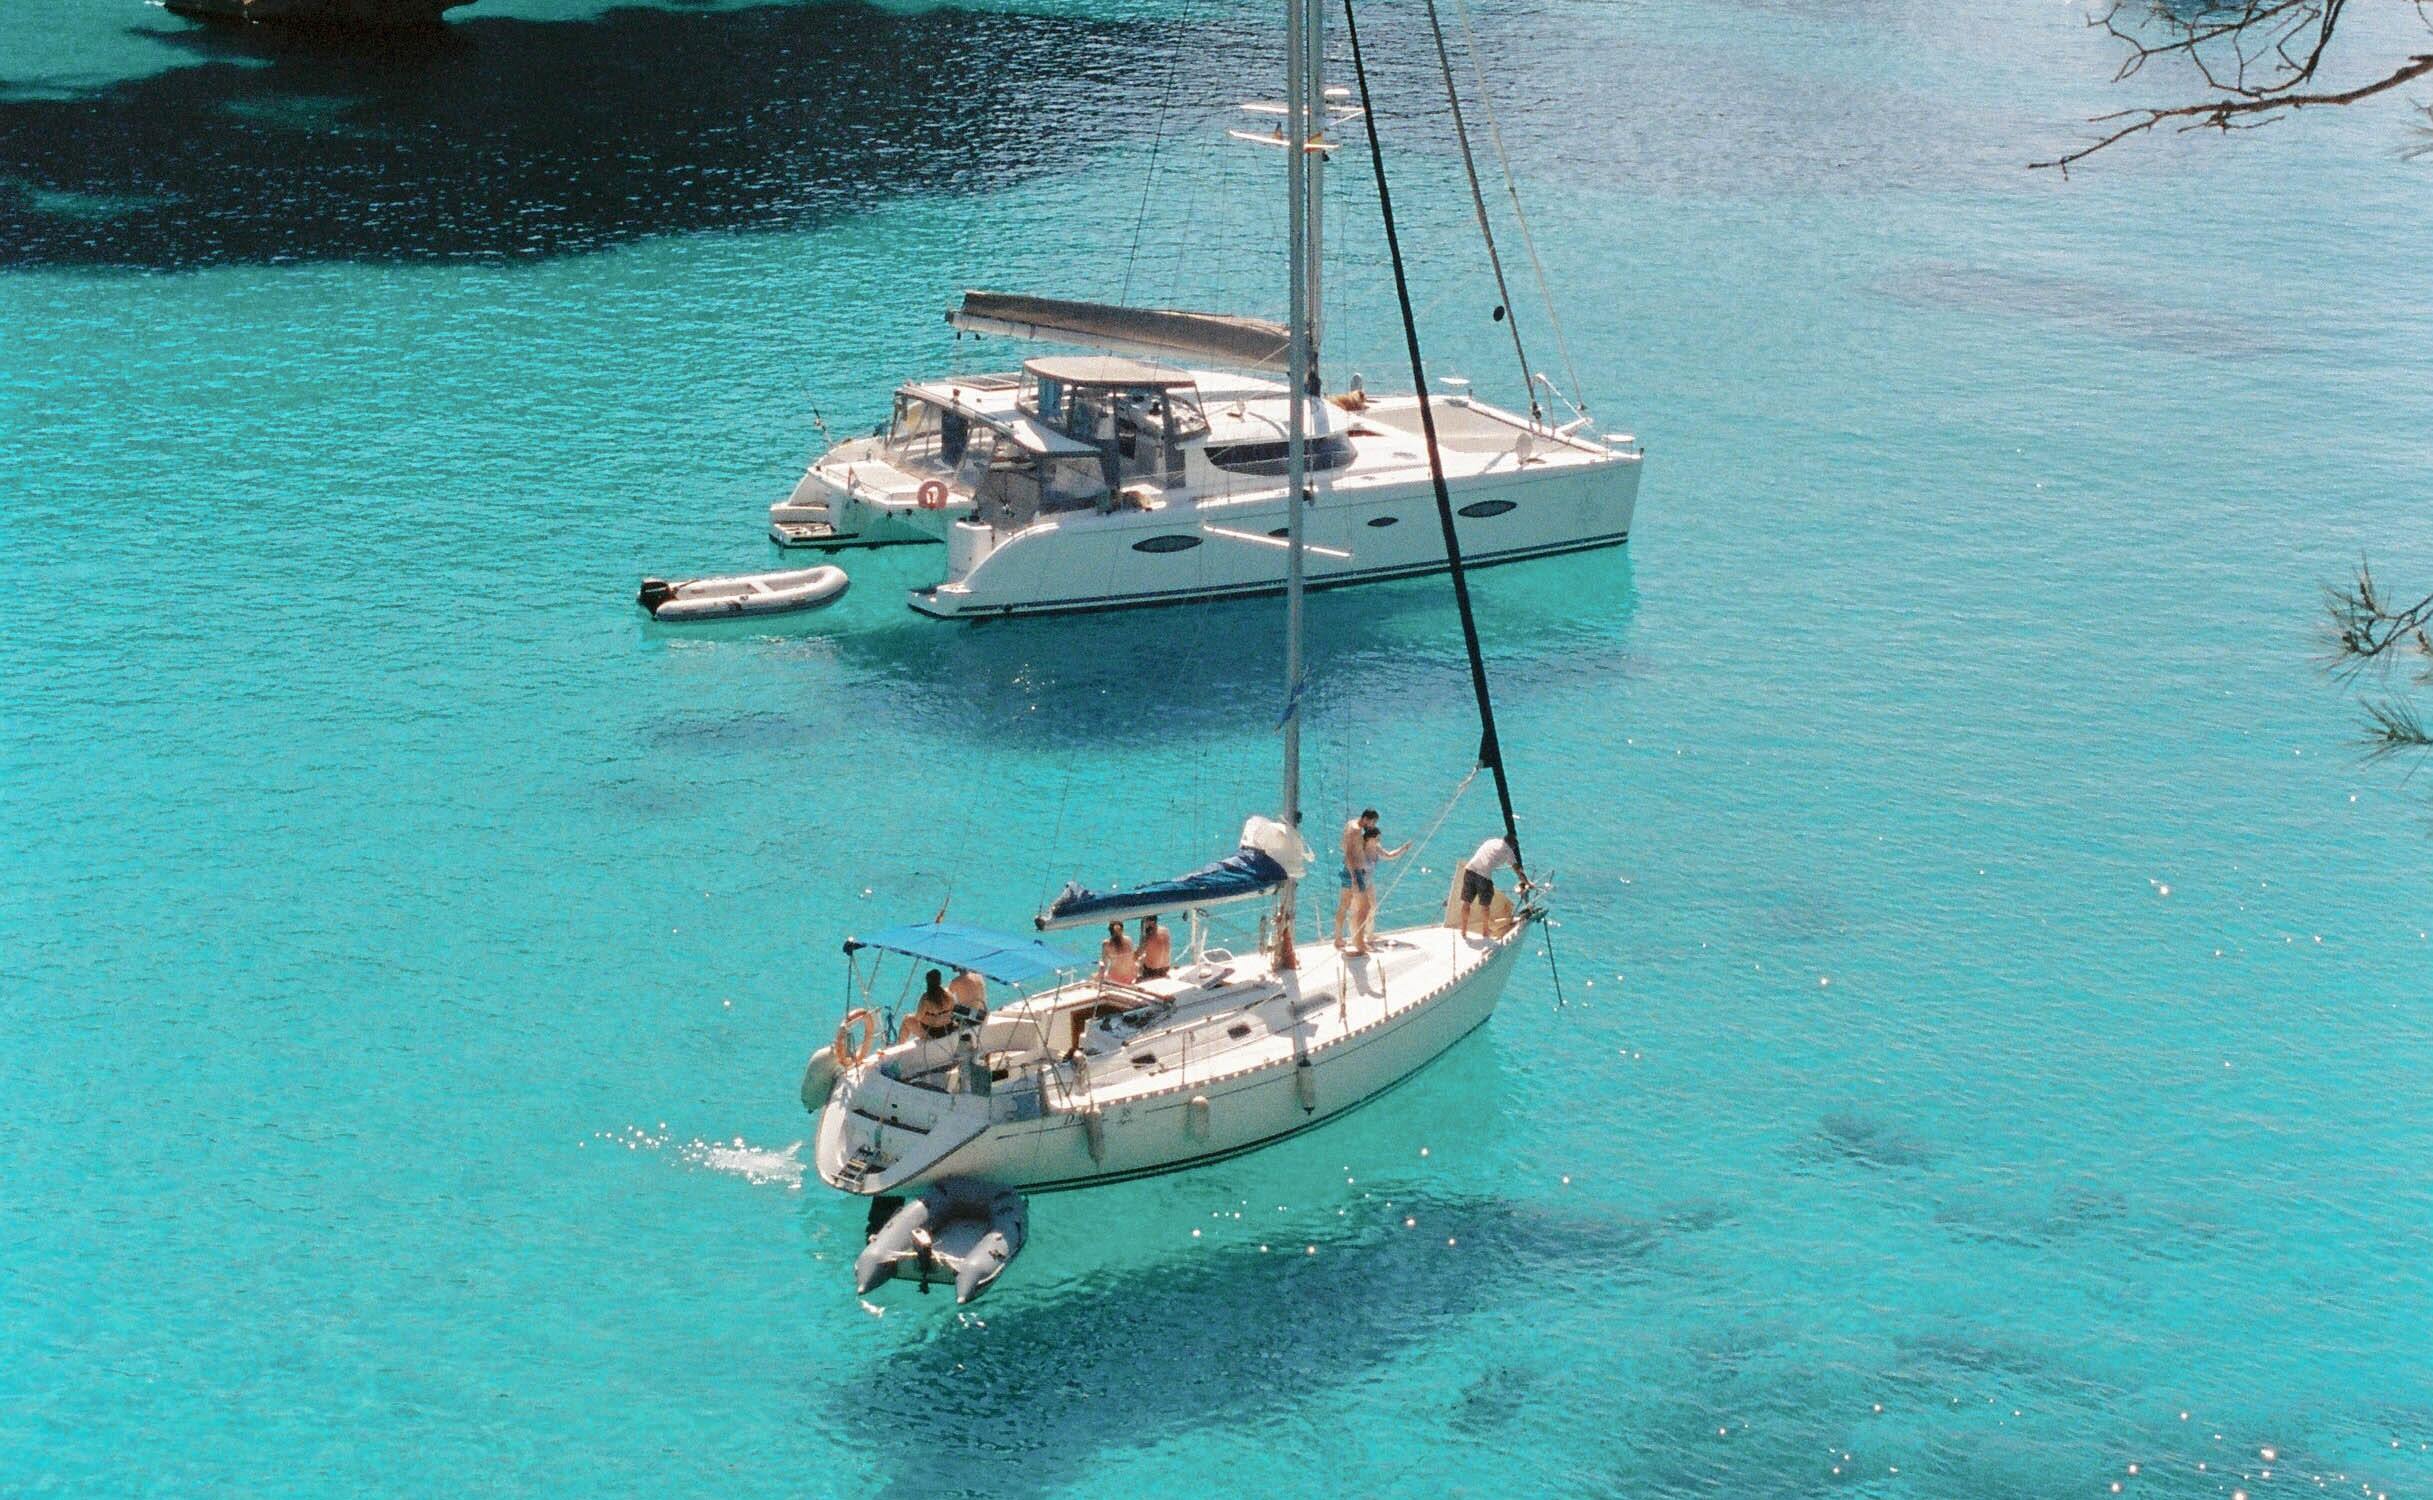 A Monohull and Catamaran in blue waters